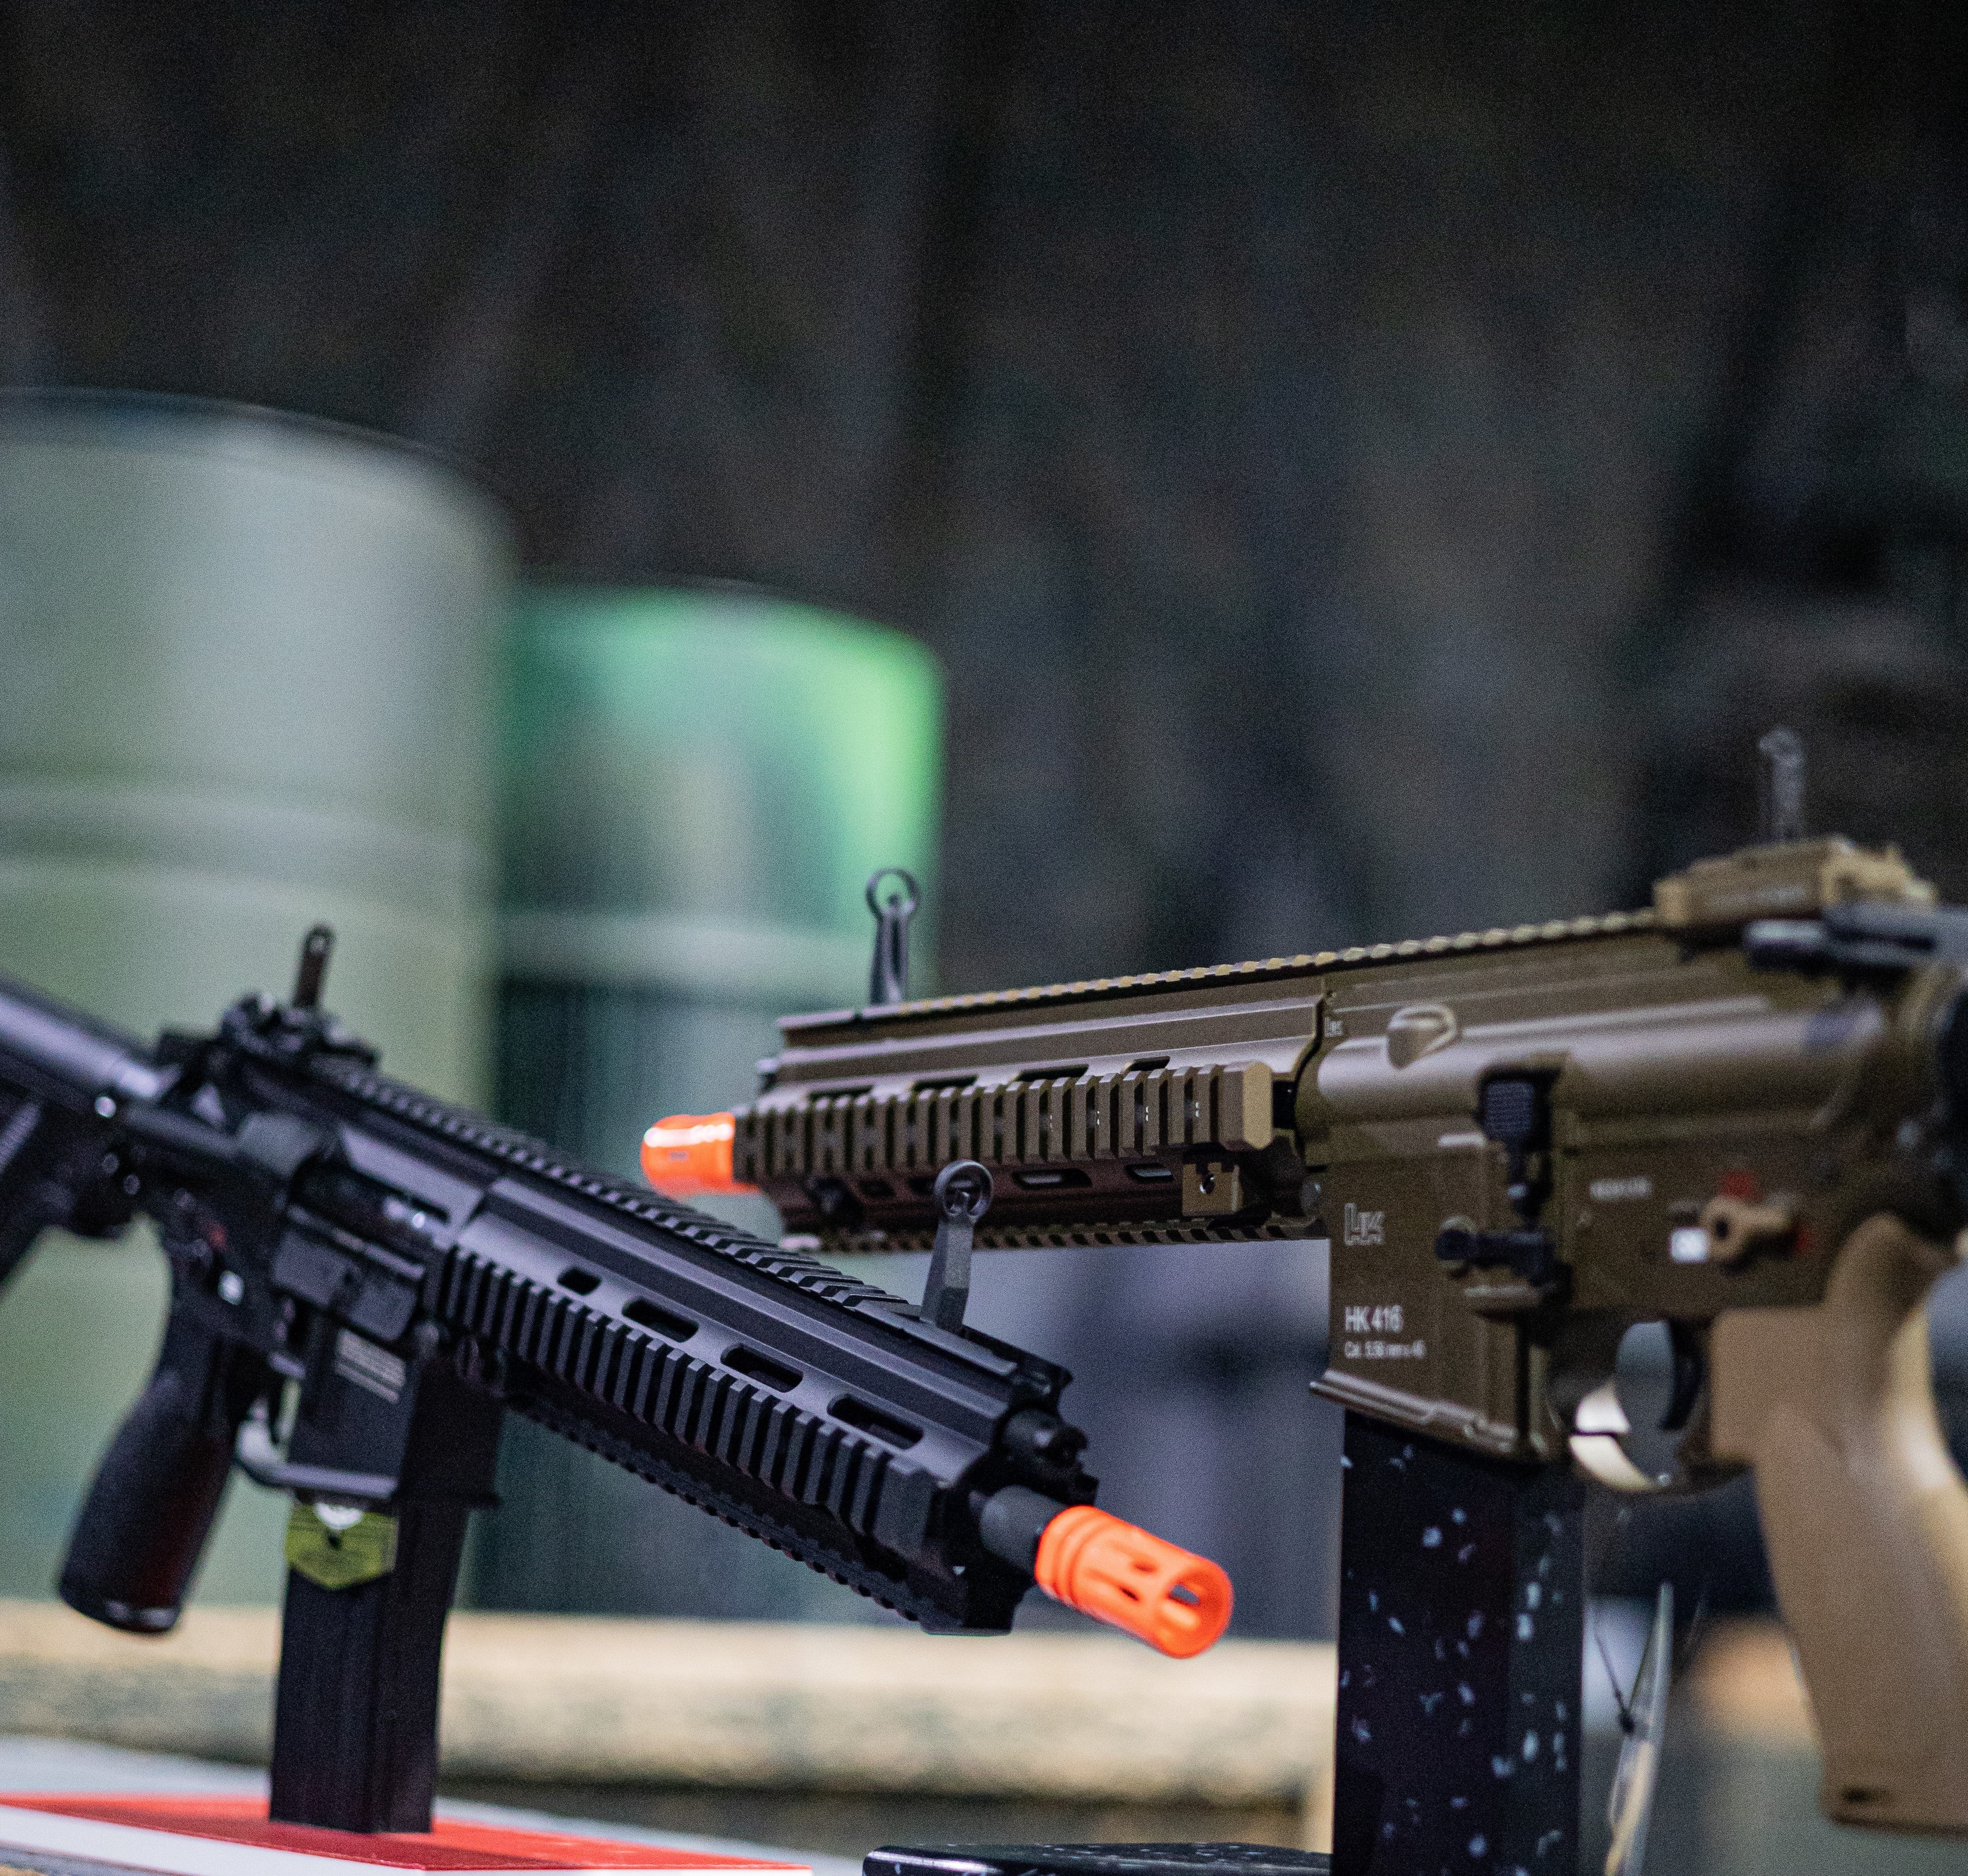 HK G36C Airsoft AEG Rifle - COMPETITION : Elite Force